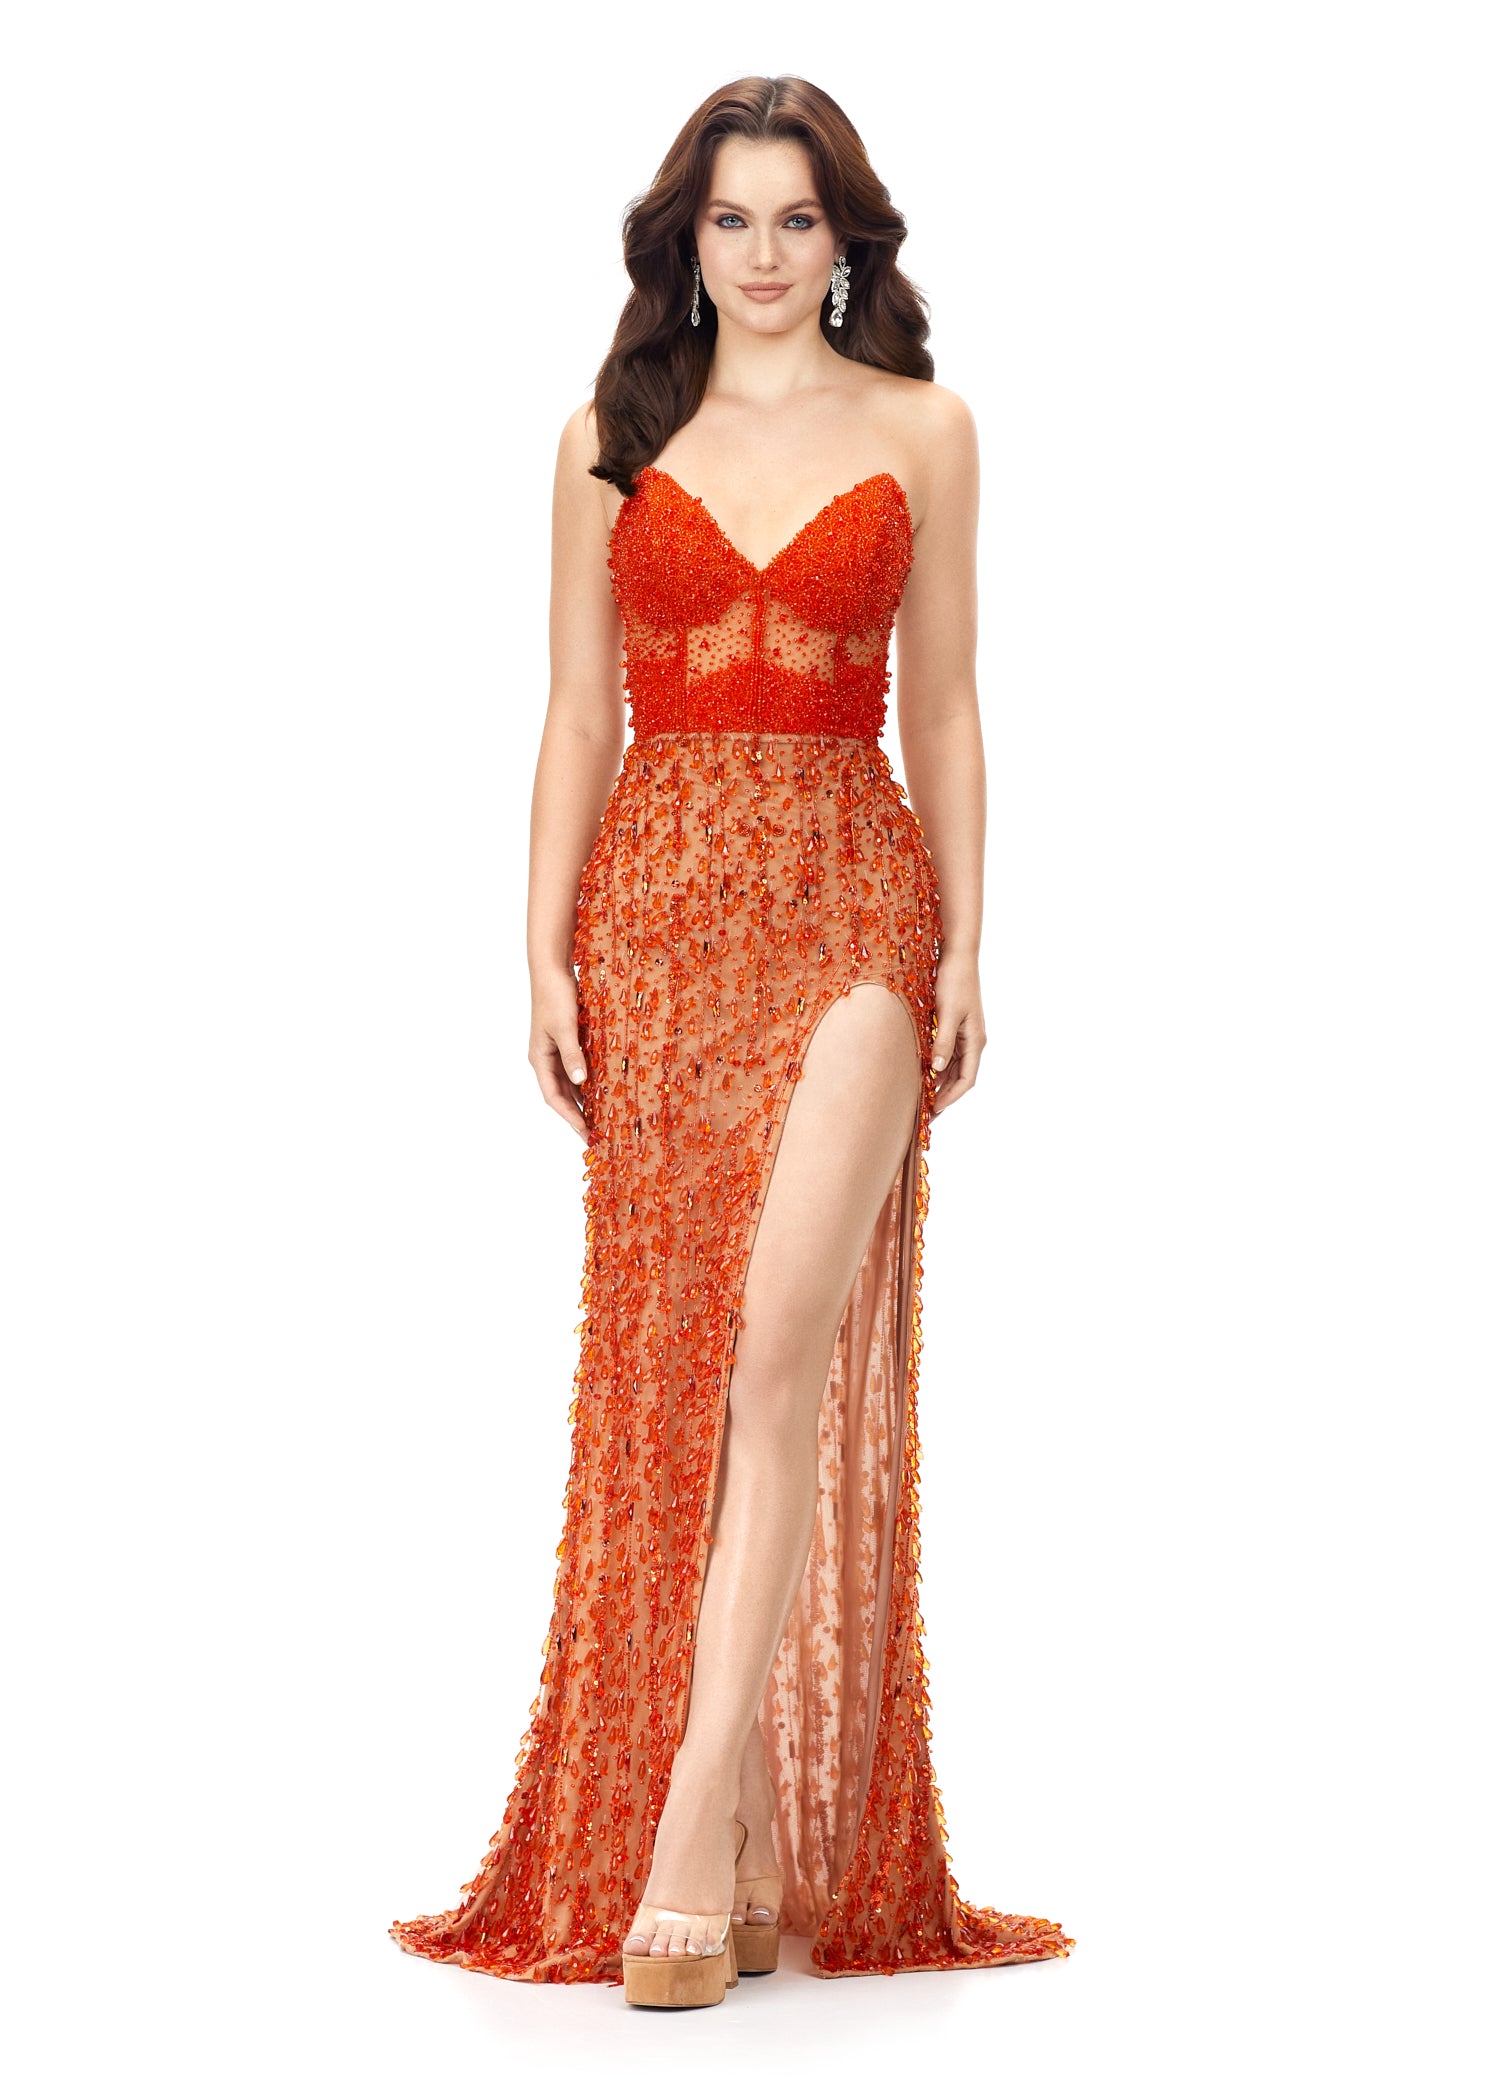 Ashley Lauren 11275 This stunning strapless evening gown features an illusion corset bustier embellished with beading. The fitted skirt is complete with fringe and a left leg slit. Sweetheart Neckline Illusion Corset Bustier Left Leg Slit Fringe COLOR: Orange